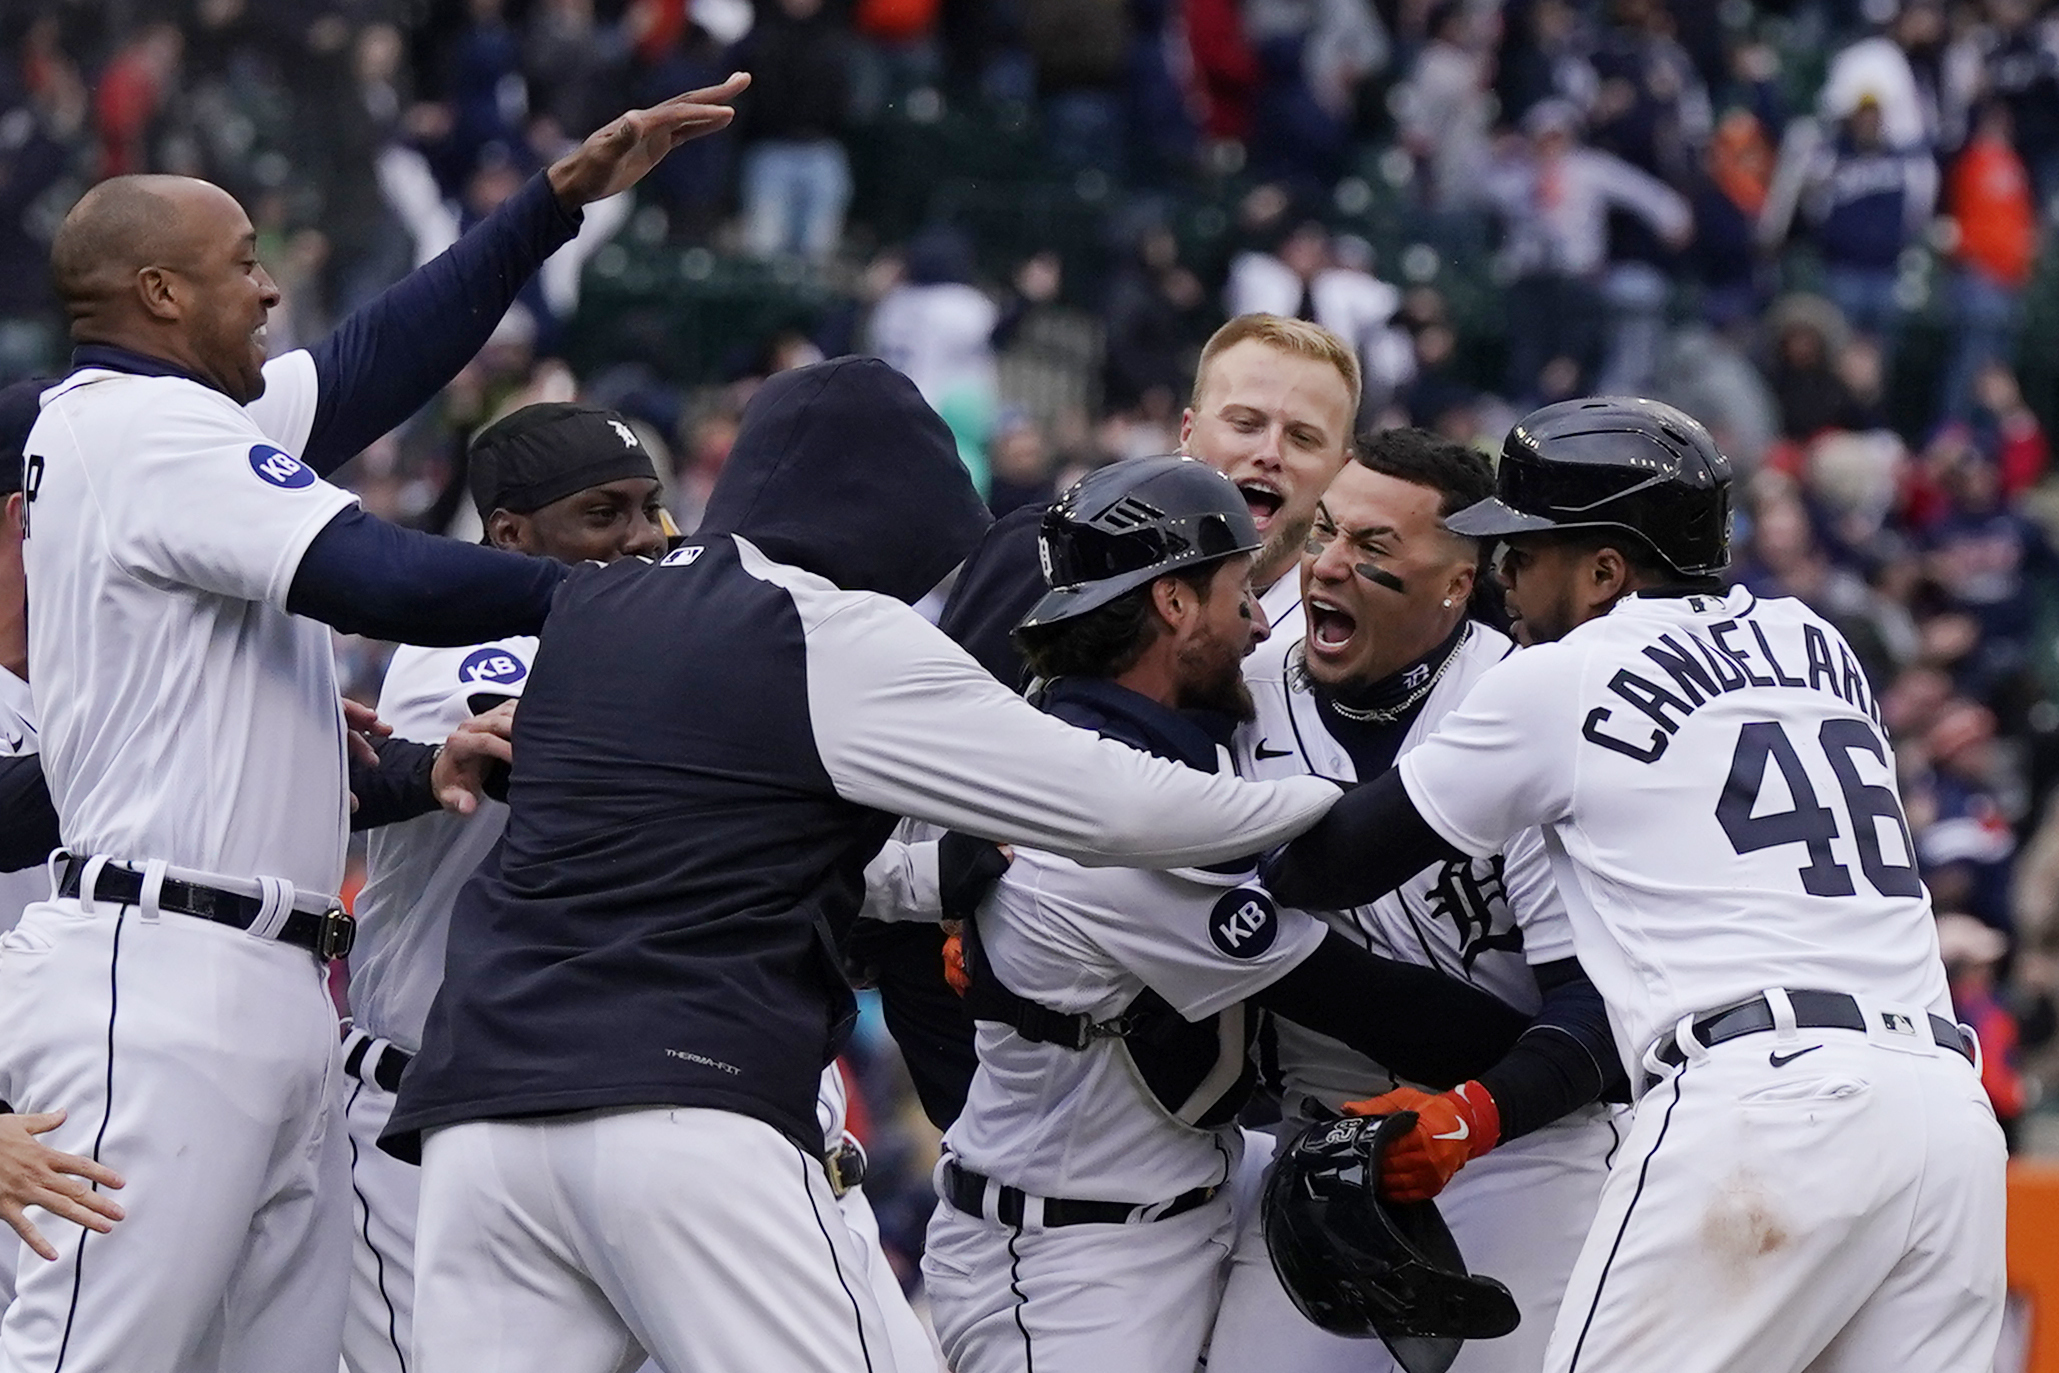 Báez Single, Game-Ending Review Lifts Tigers Over White Sox